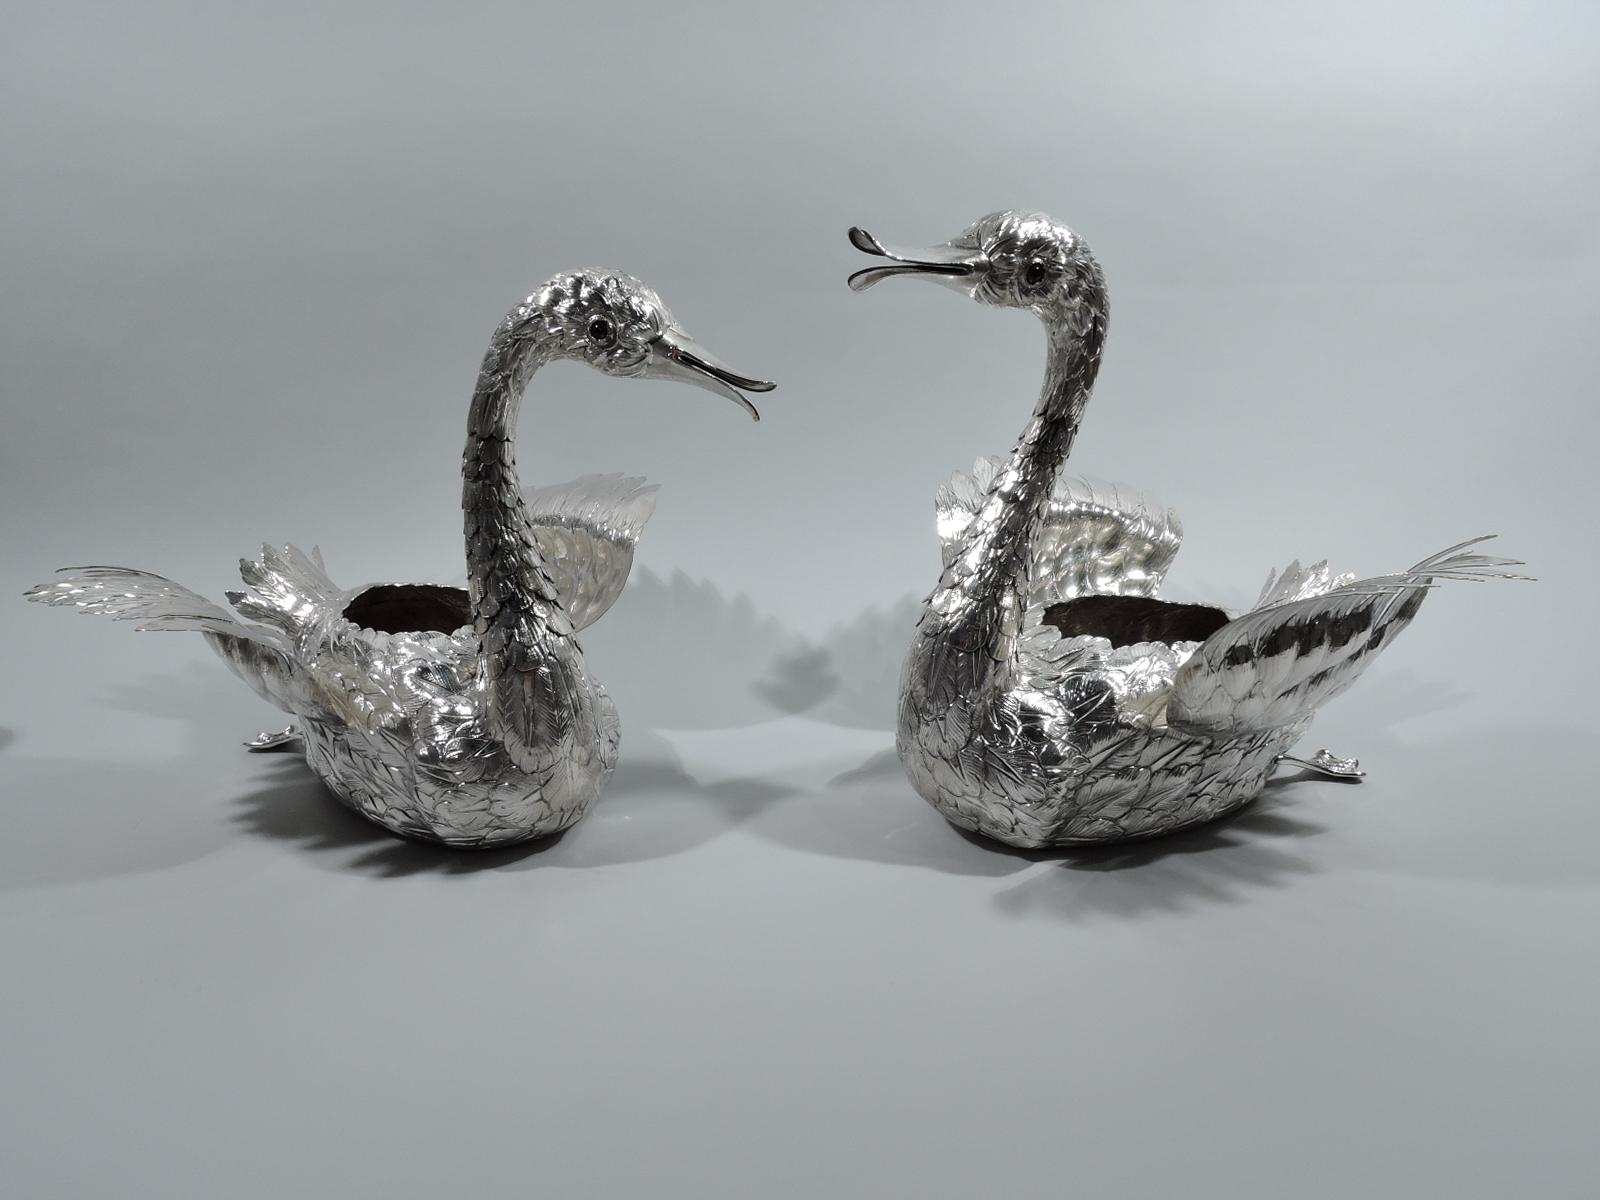 Pair of enchanting silver swans. Each: Ovoid body with webbed feet, soft haunches, articulated neck, and graceful head with glass eyes and gaping bill. Gorgeous plumage from imbricated neck to erect tail feathers. Wings hinged and body hollow for